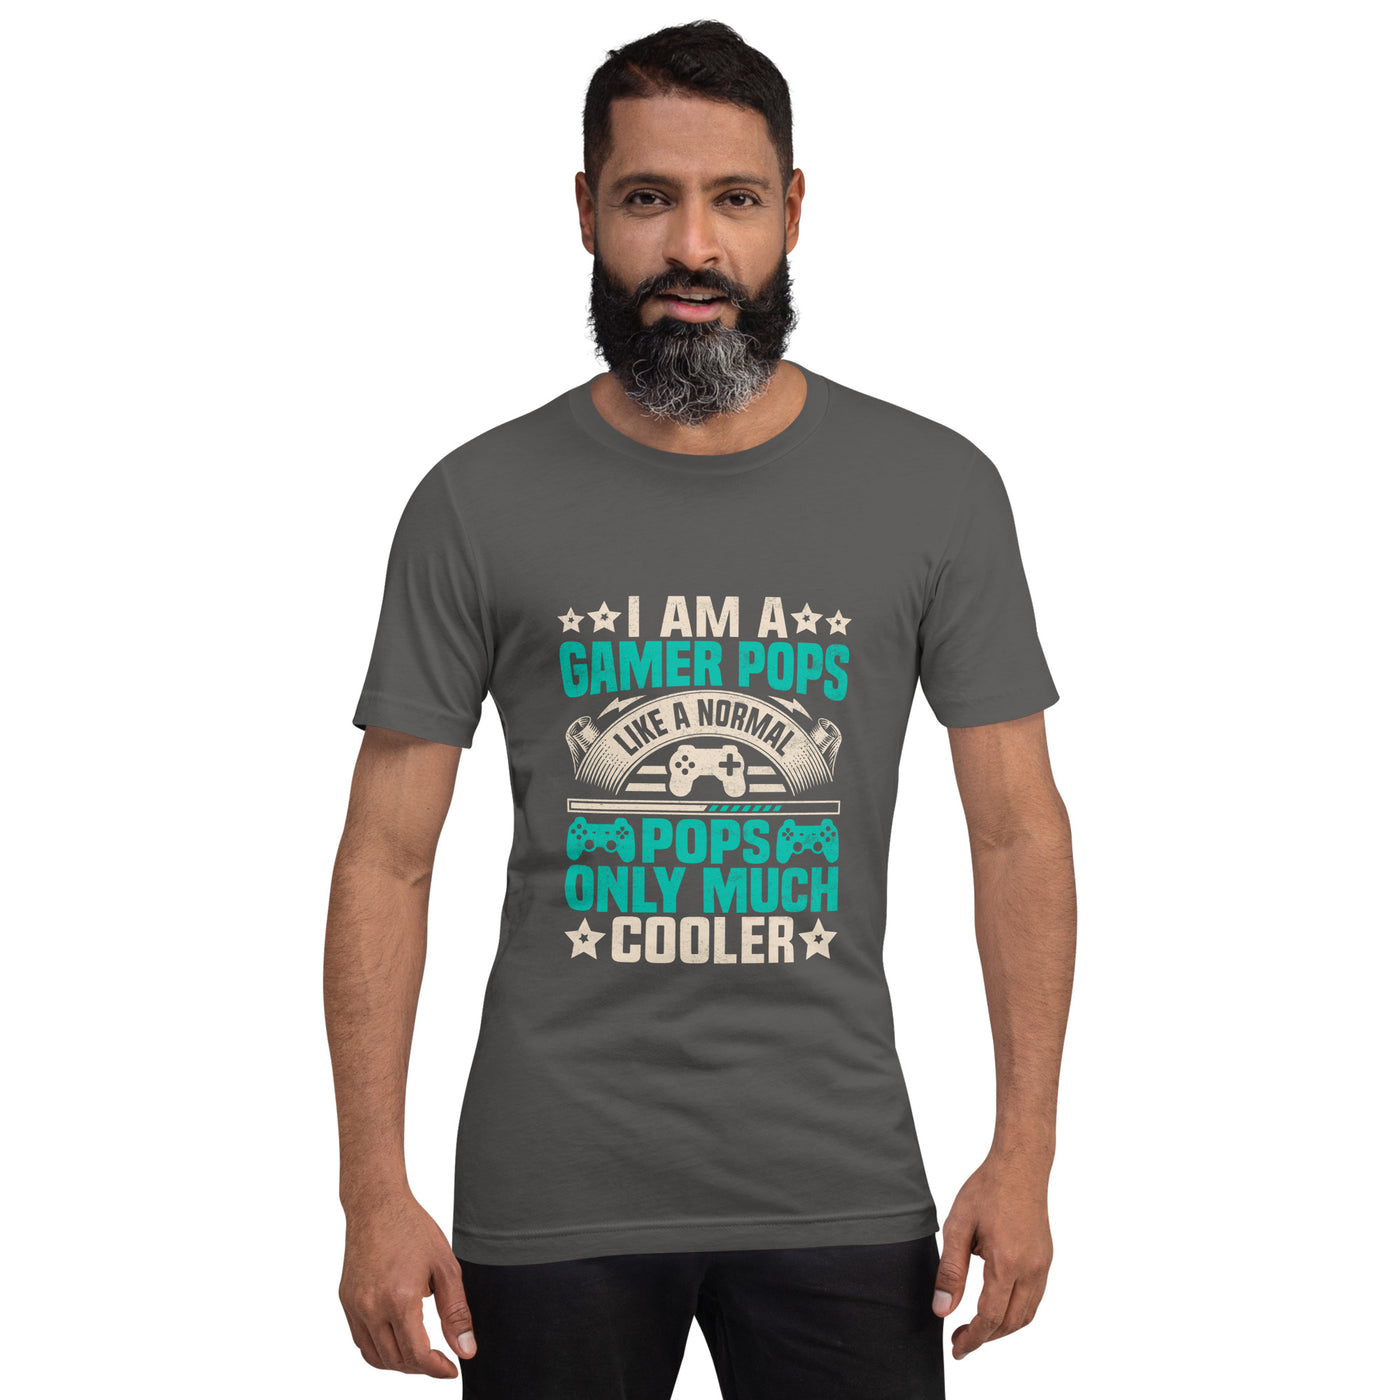 I am a Gamer Pops, like a normal Pops only much cooler - Unisex t-shirt